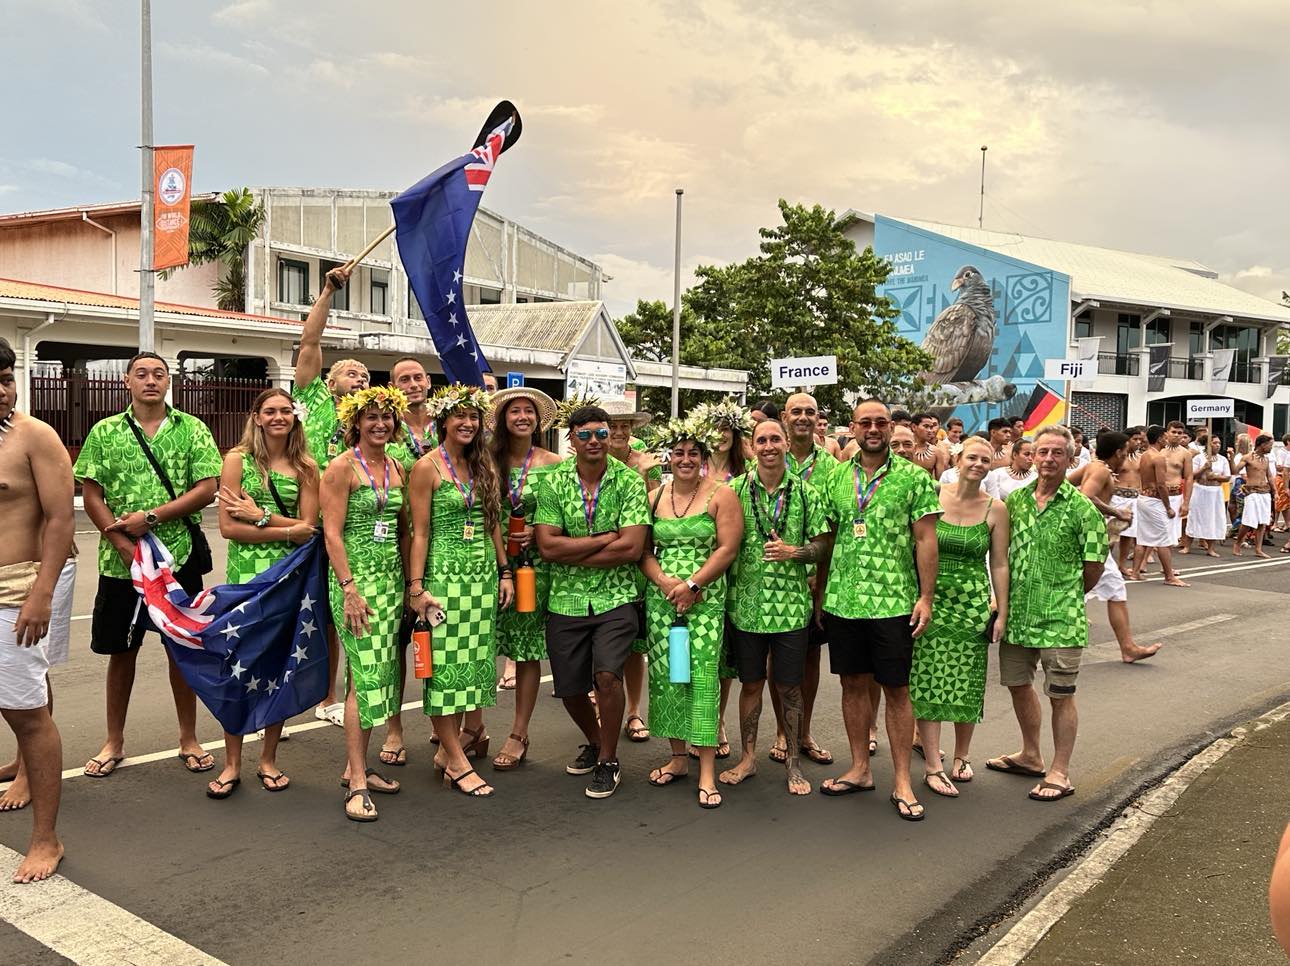 Cook Islands’ outfits draw compliments at World Paddling Championships opening